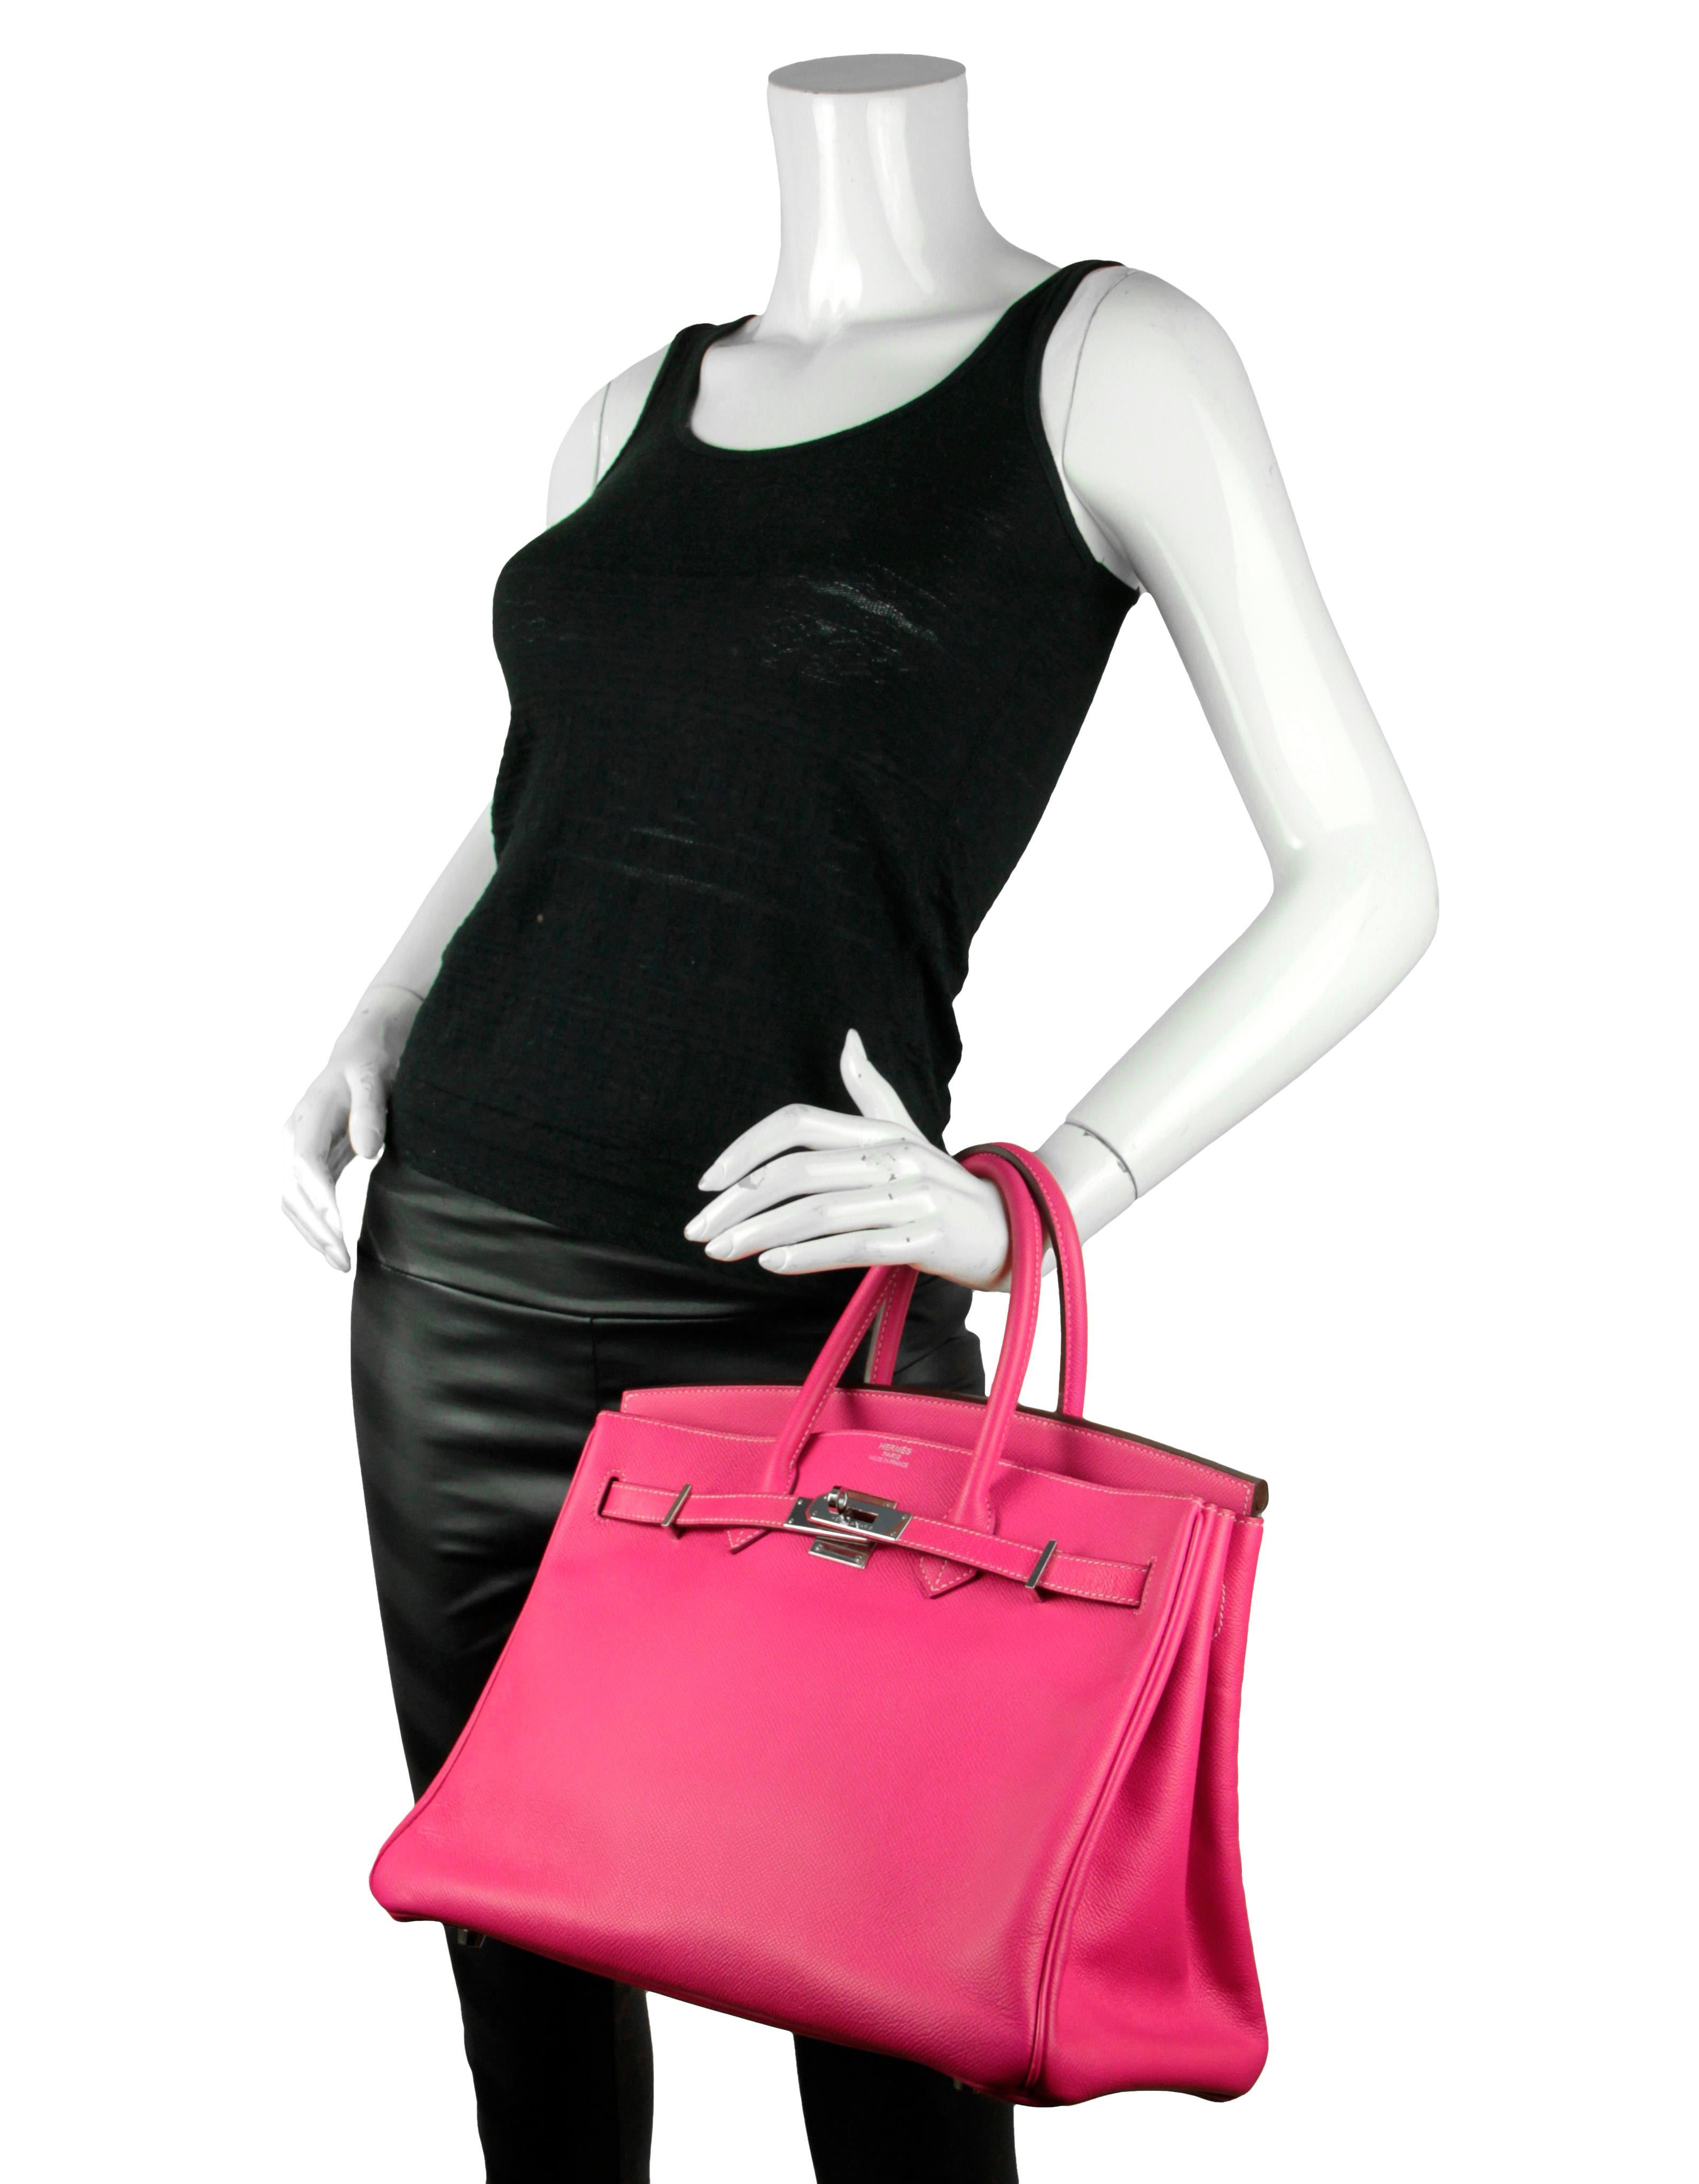 Hermes  Rose Tyrien/ Rubis Epsom Leather 35cm Candy Birkin Bag PHW

Made In: France
Year of Production: 2011
Color: Rose Tyrein pink
Hardware: Silvertone palladium
Materials: Clemence
Lining: Rubis chevre leather
Closure/Opening: Double arm strap